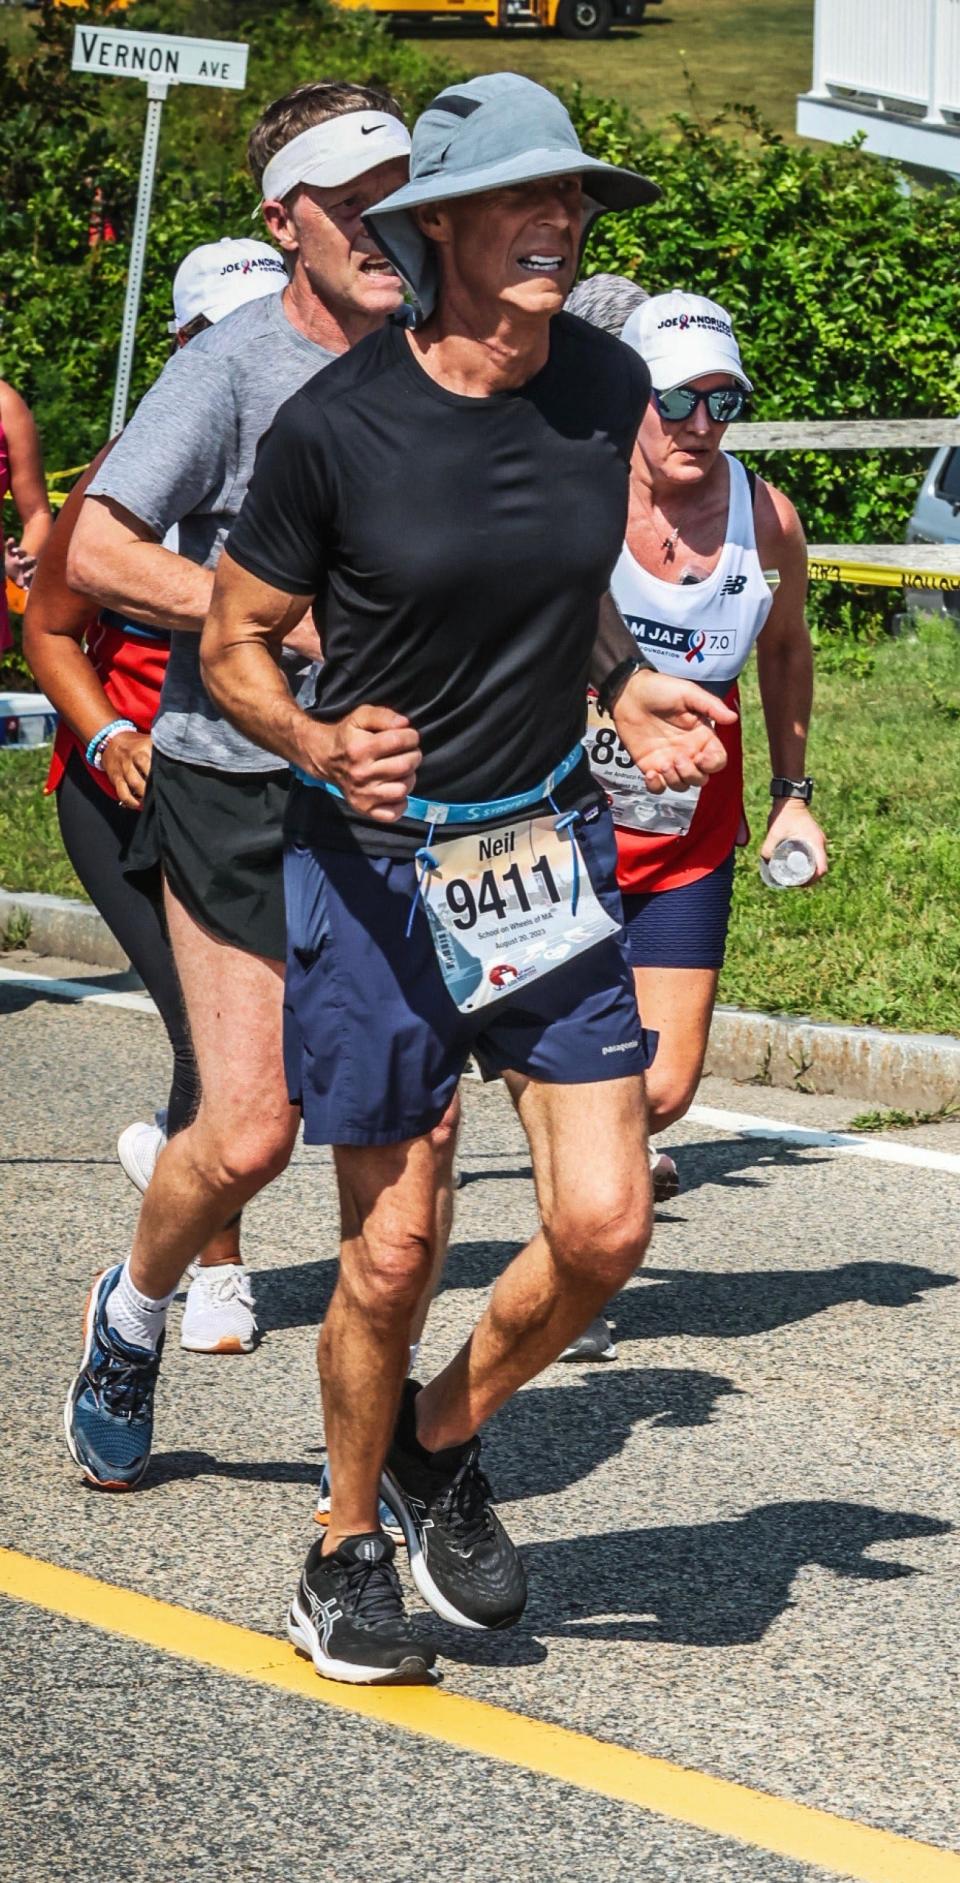 Neil Levine, of Mansfield, a co-owner of Maguire's Bar and Grill in Easton, runs his 41st Falmouth Road Race on Aug. 20, 2023, just weeks after finishing chemotherapy for cancer treatment.